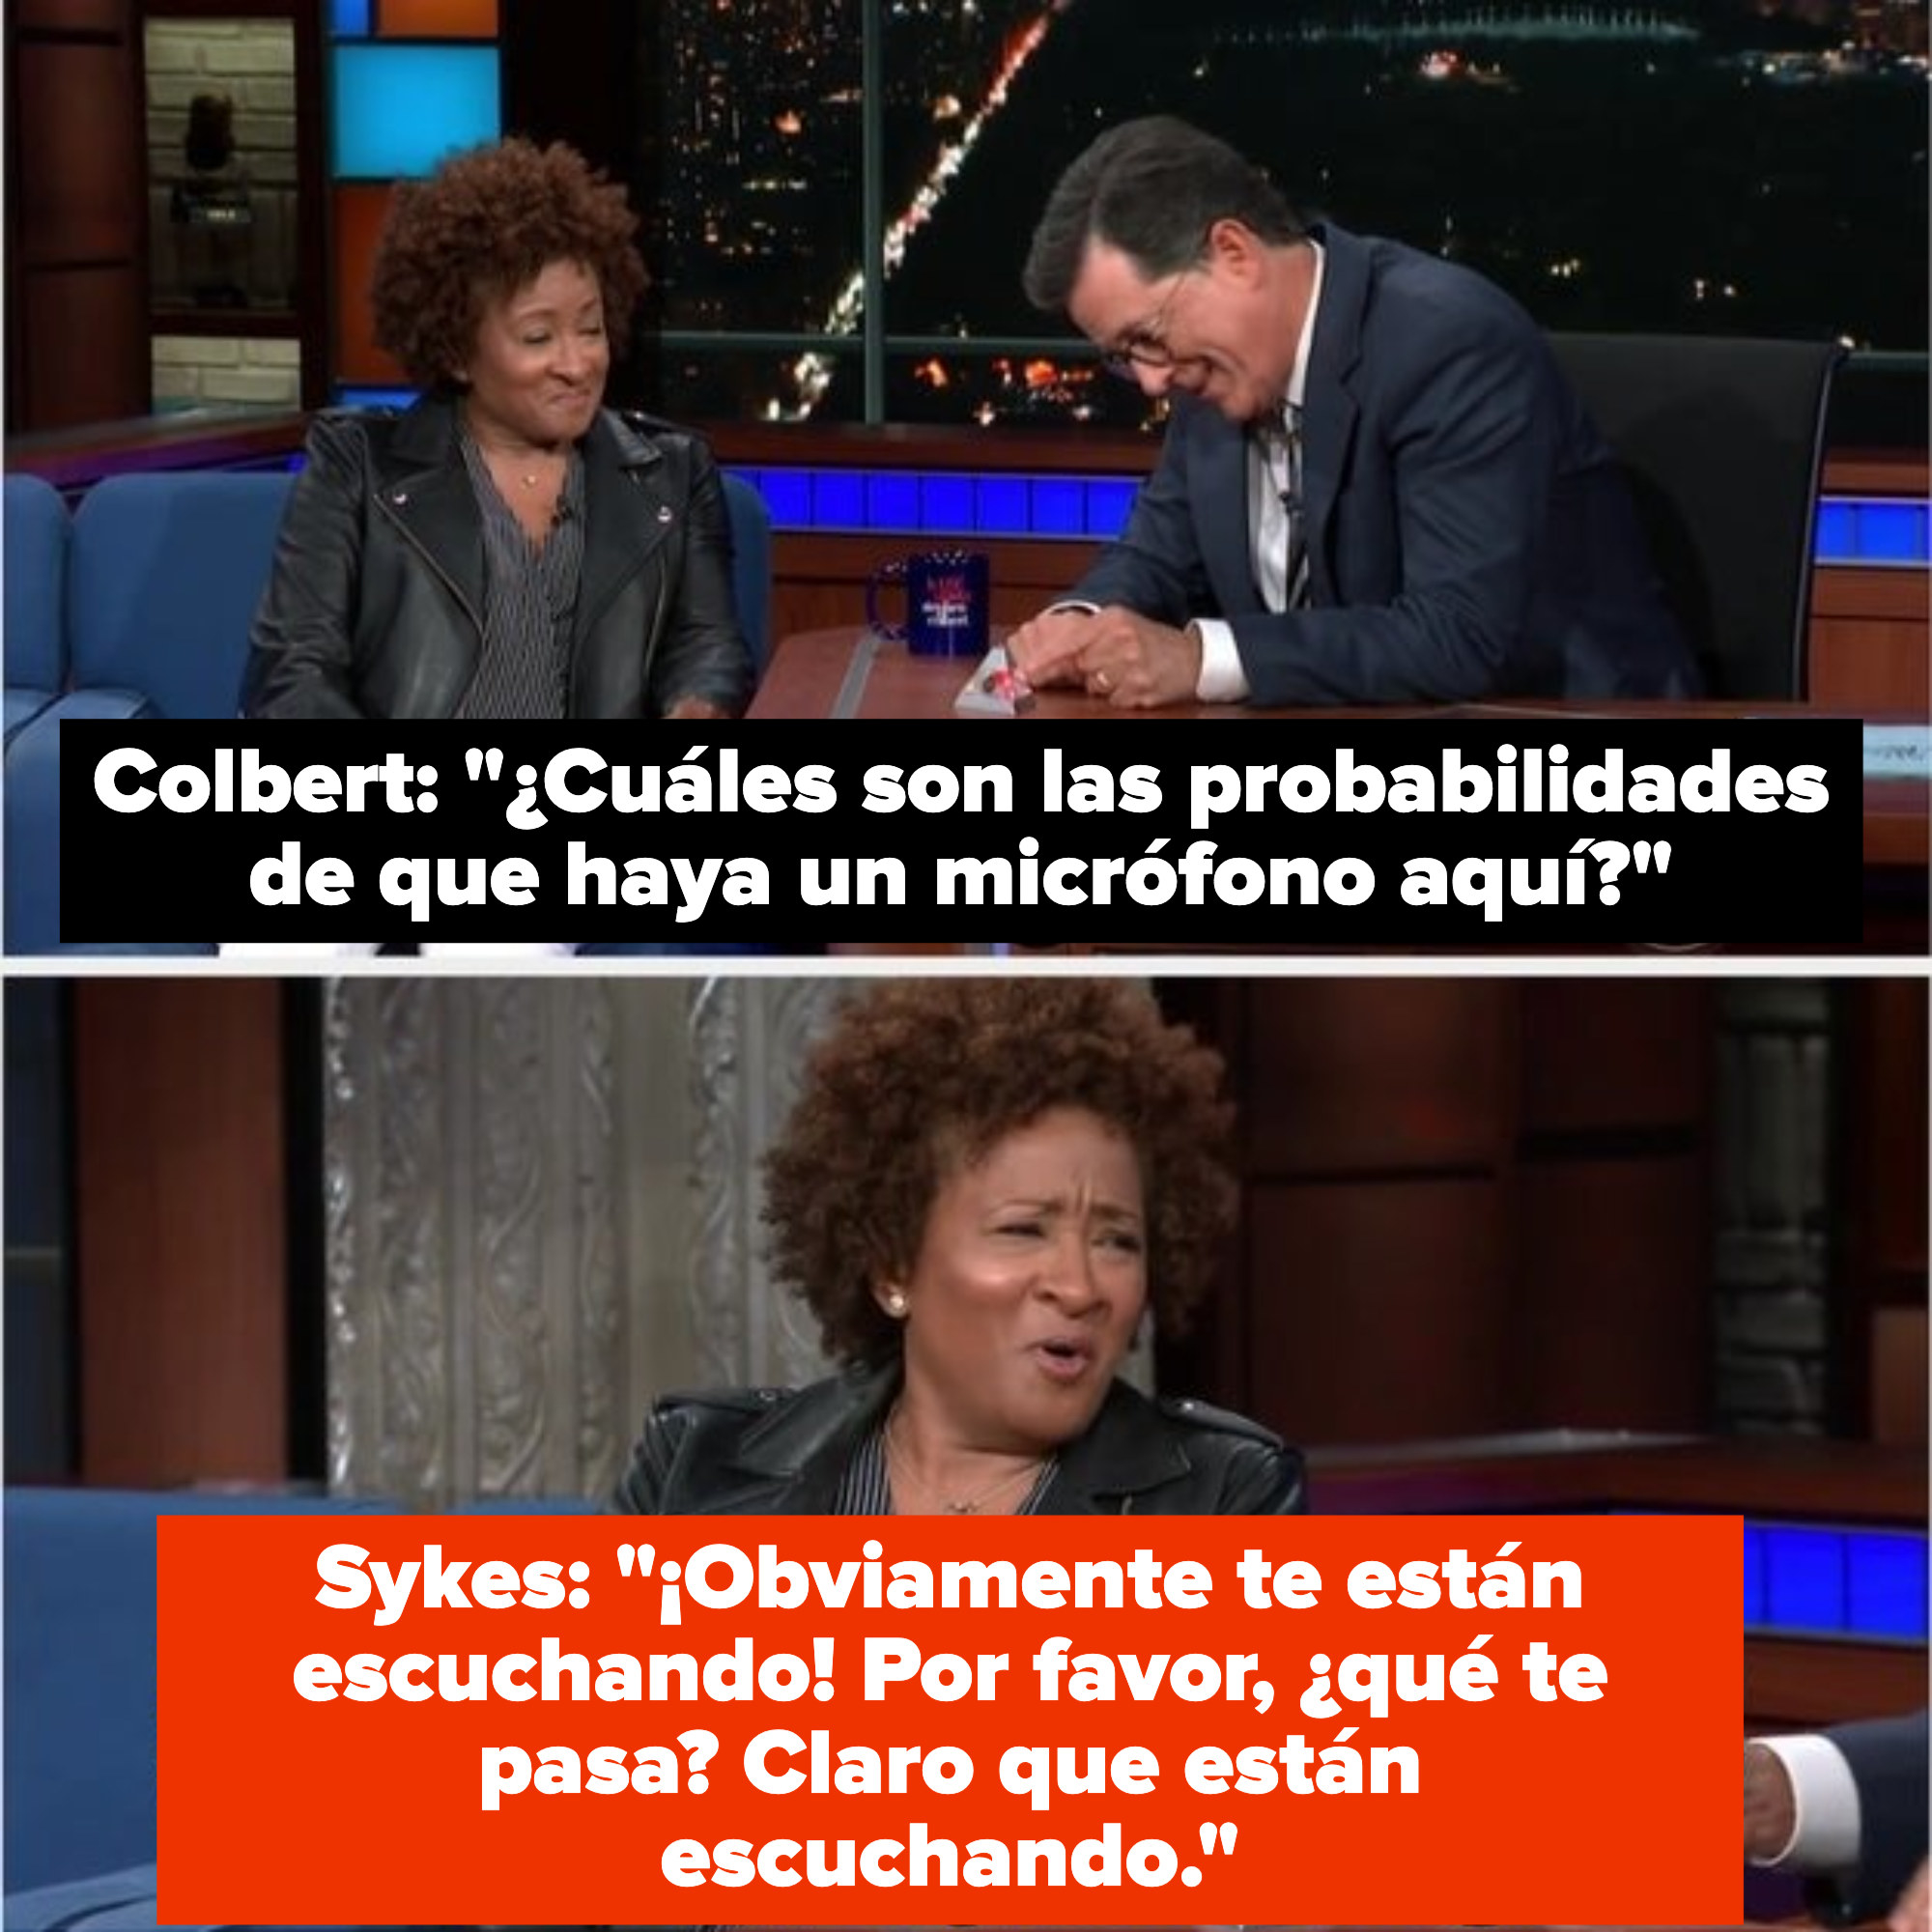 Sykes tells Colbert that the NSA is listening to him